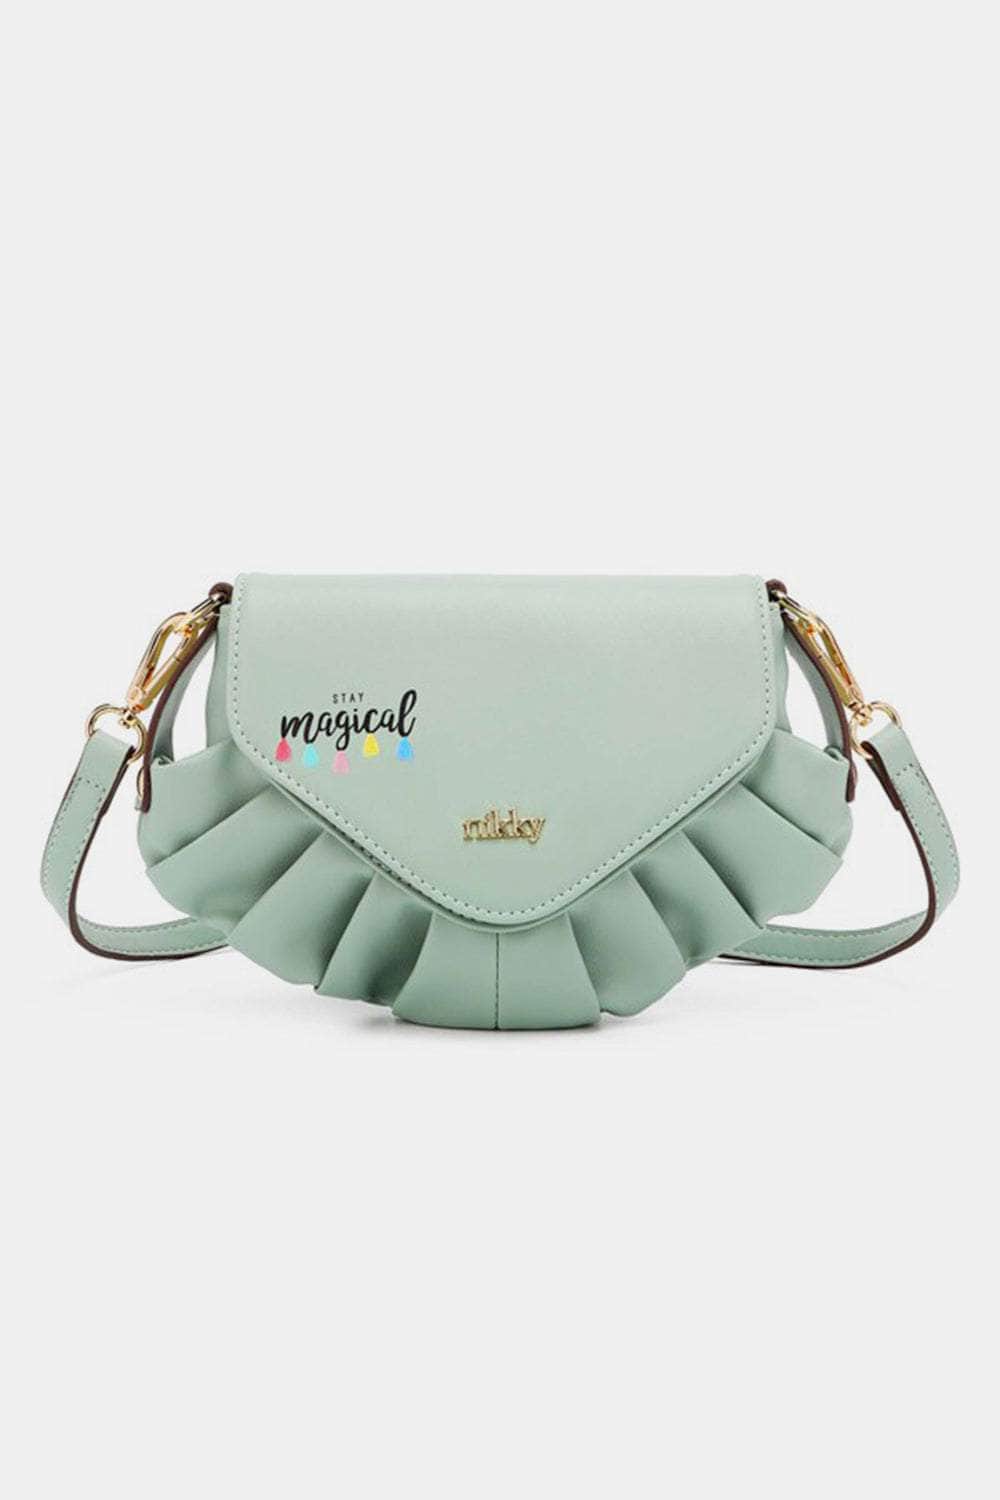 Nicole Lee USA Graphic Crossbody Bag Candy Mint / One Size